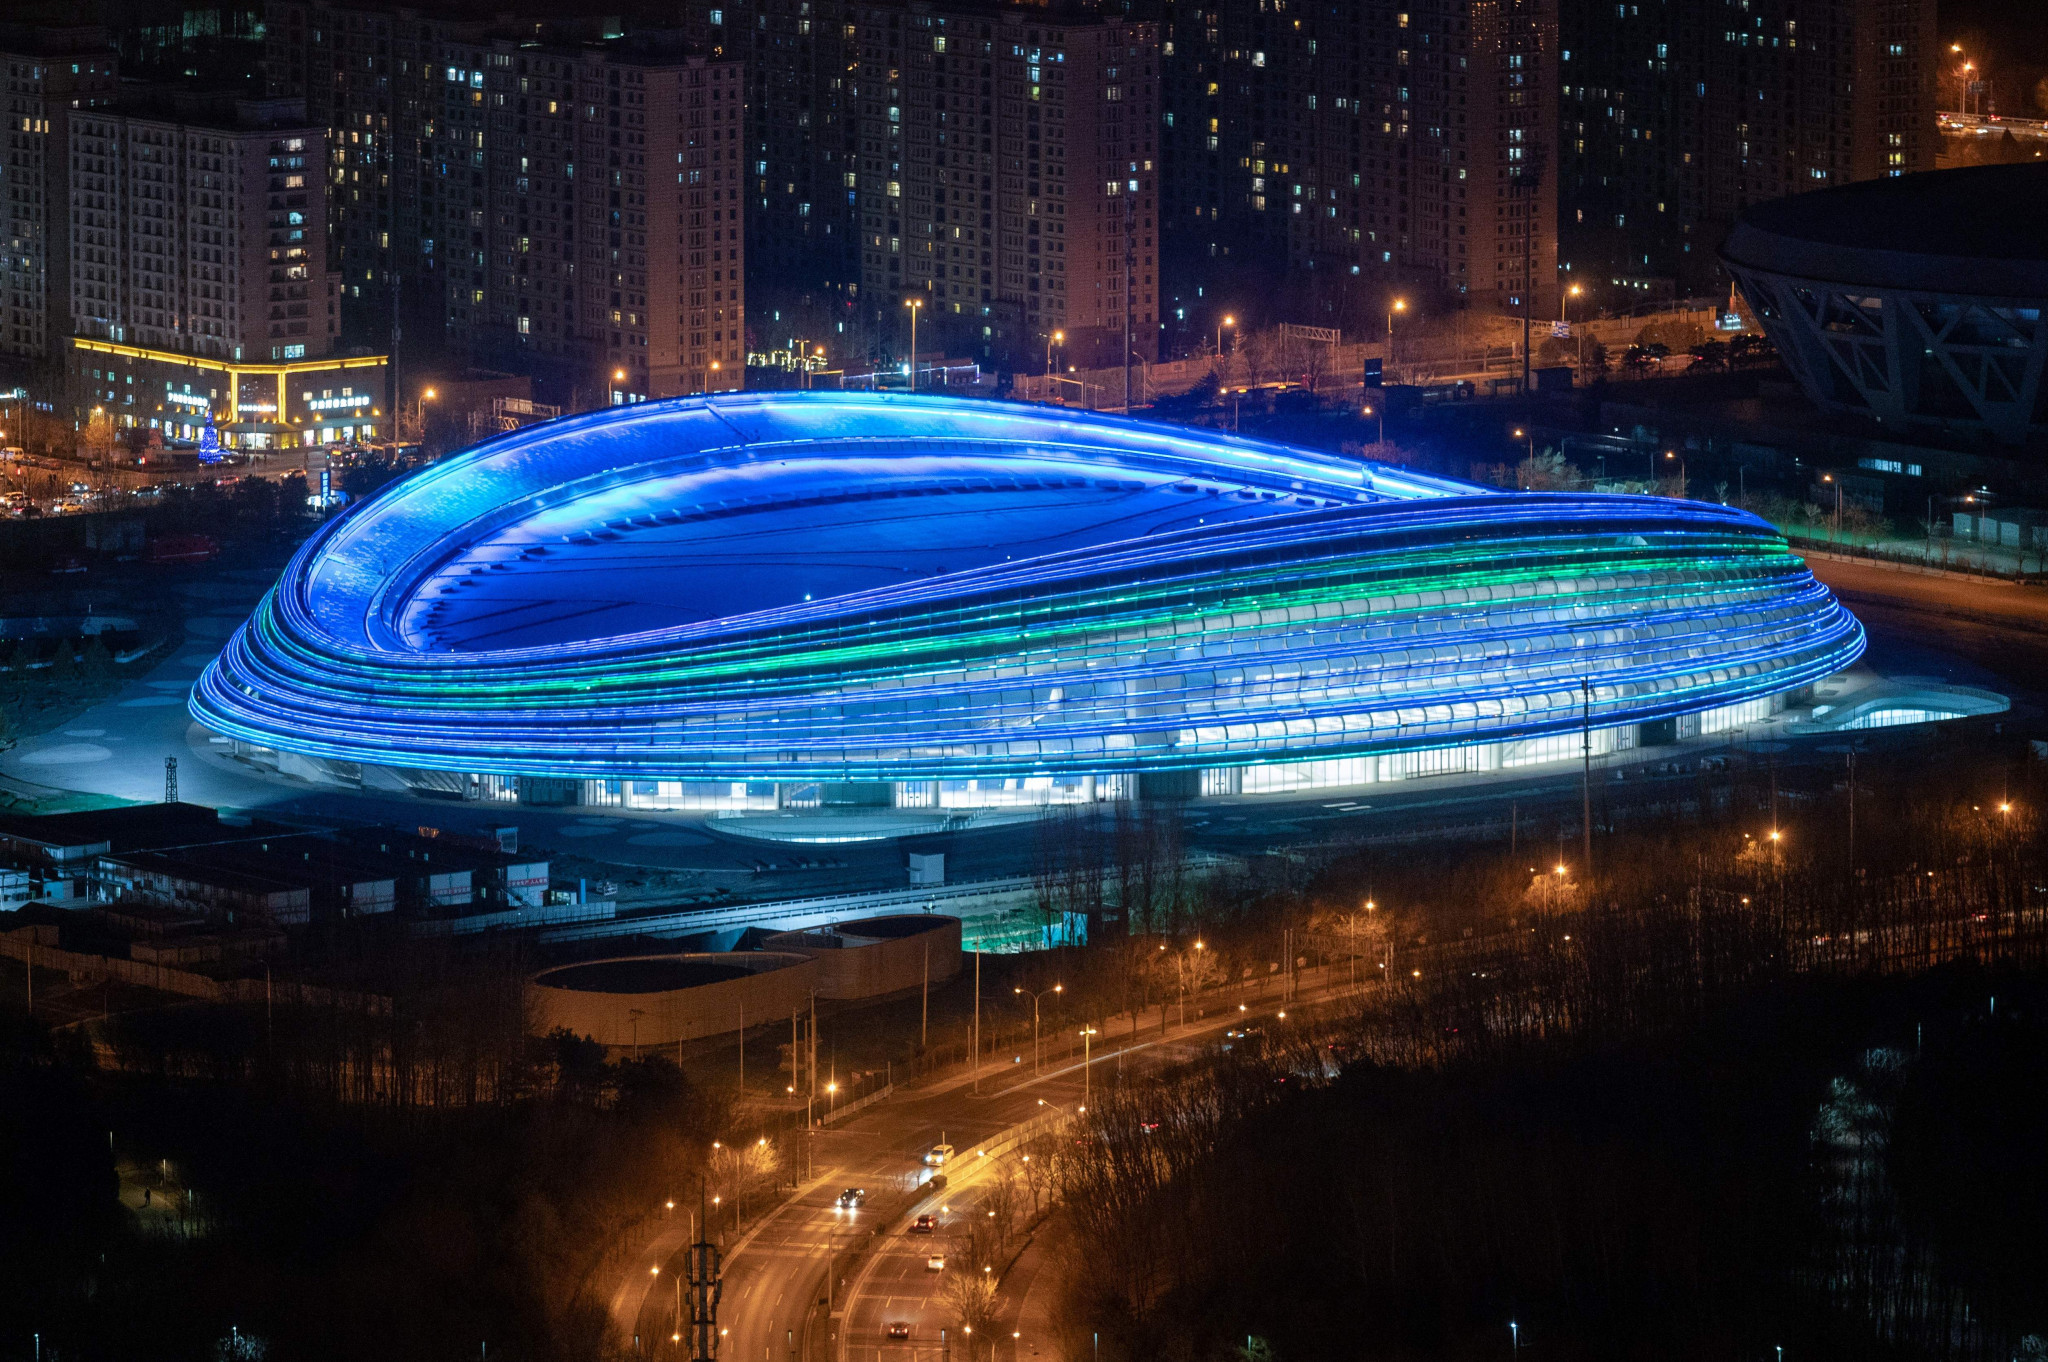 Beijing 2022 speed skating venue to open to the public